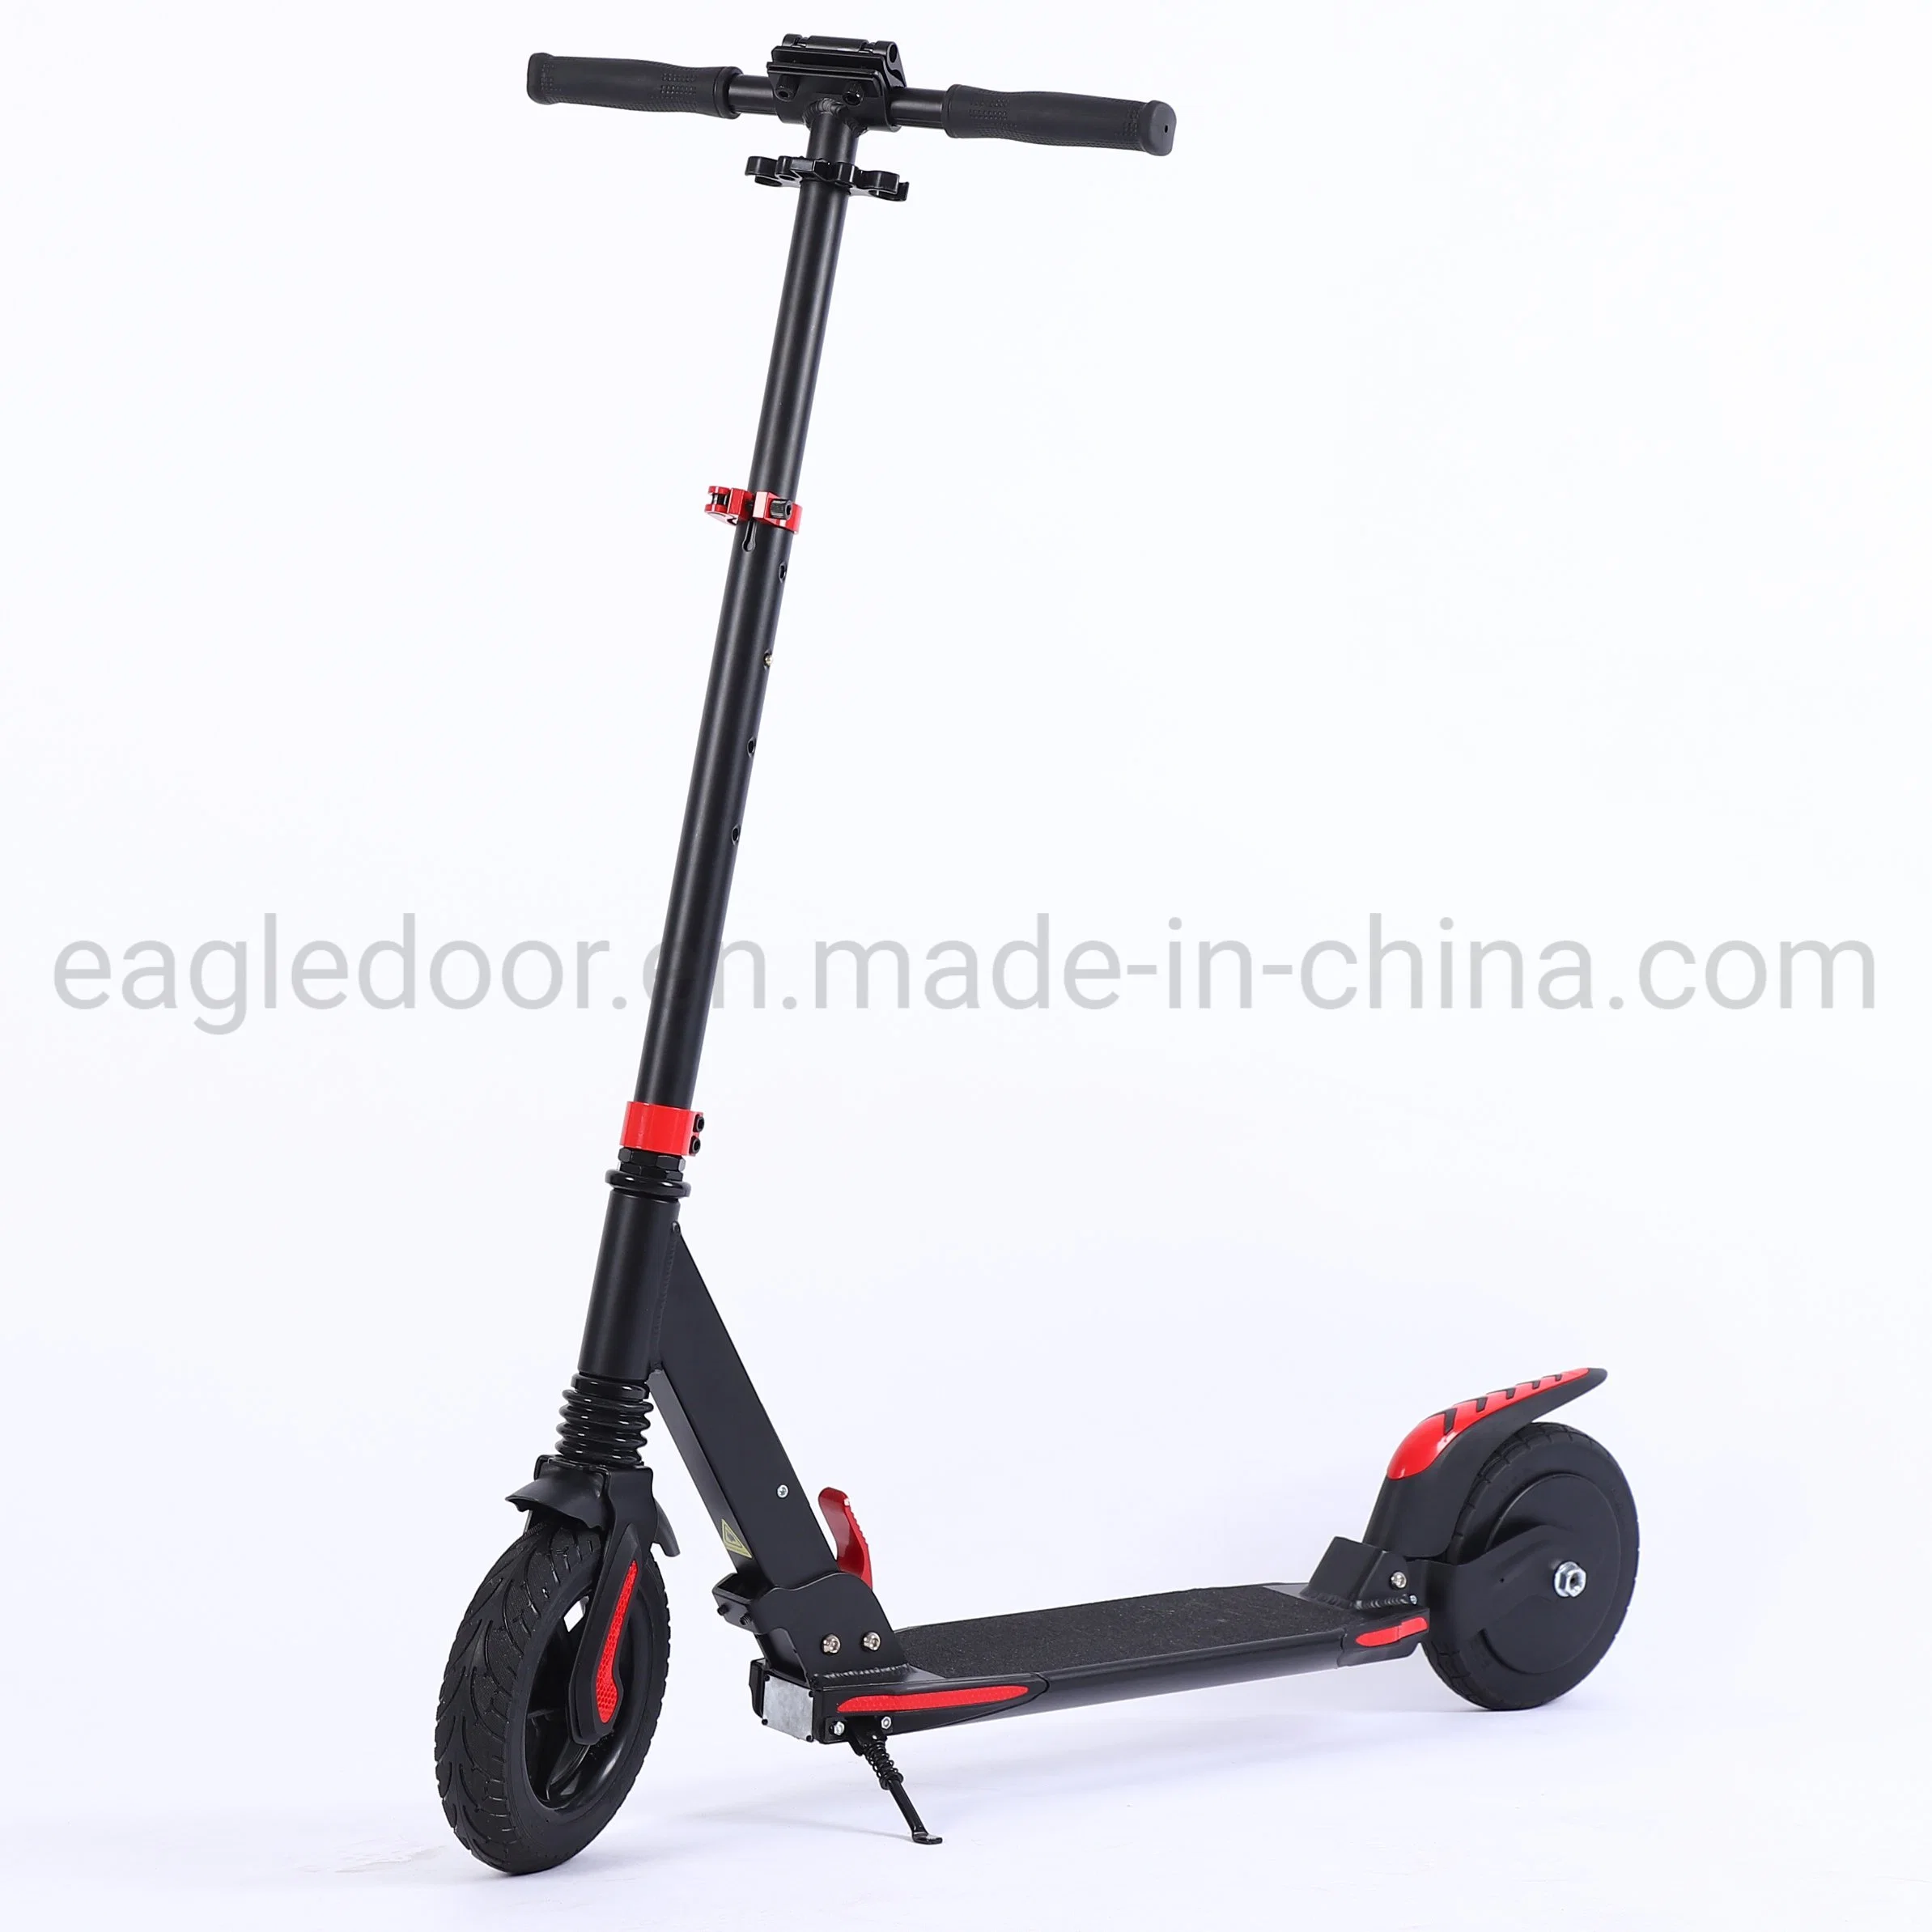 Wholesale Foldable Scooter 8.5 Inch 180W Kid Electric Scooter 2 Wheel Mobility Scooter with Foot Brake